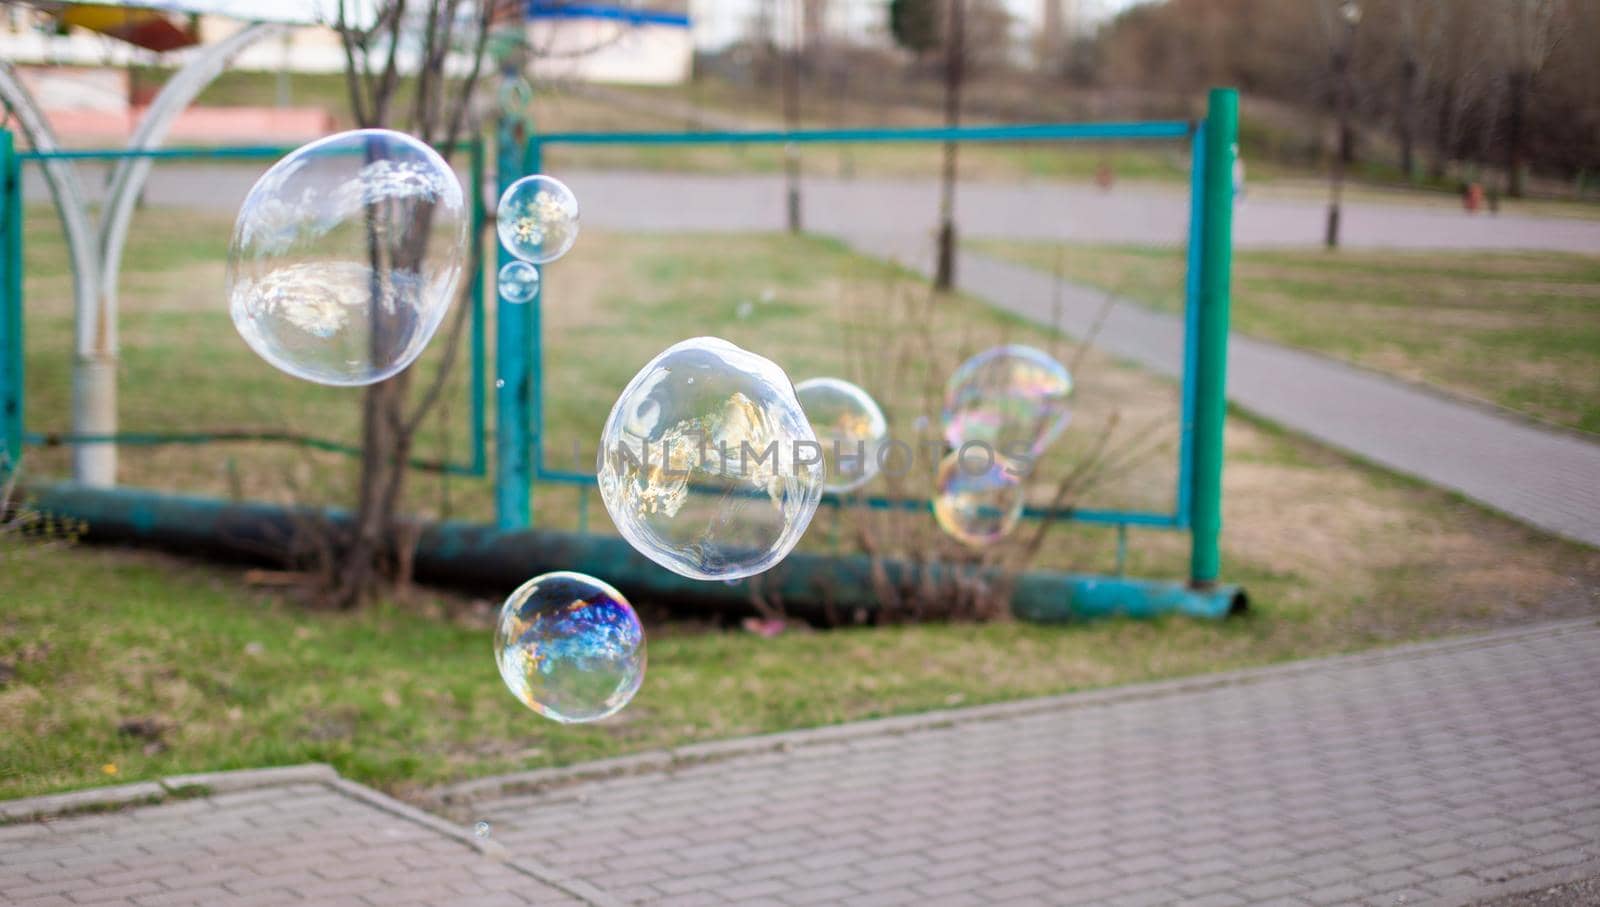 A girl blows soap bubbles in the park for the entertainment of children. Large, colorful soap bubbles in the open air in a public park.